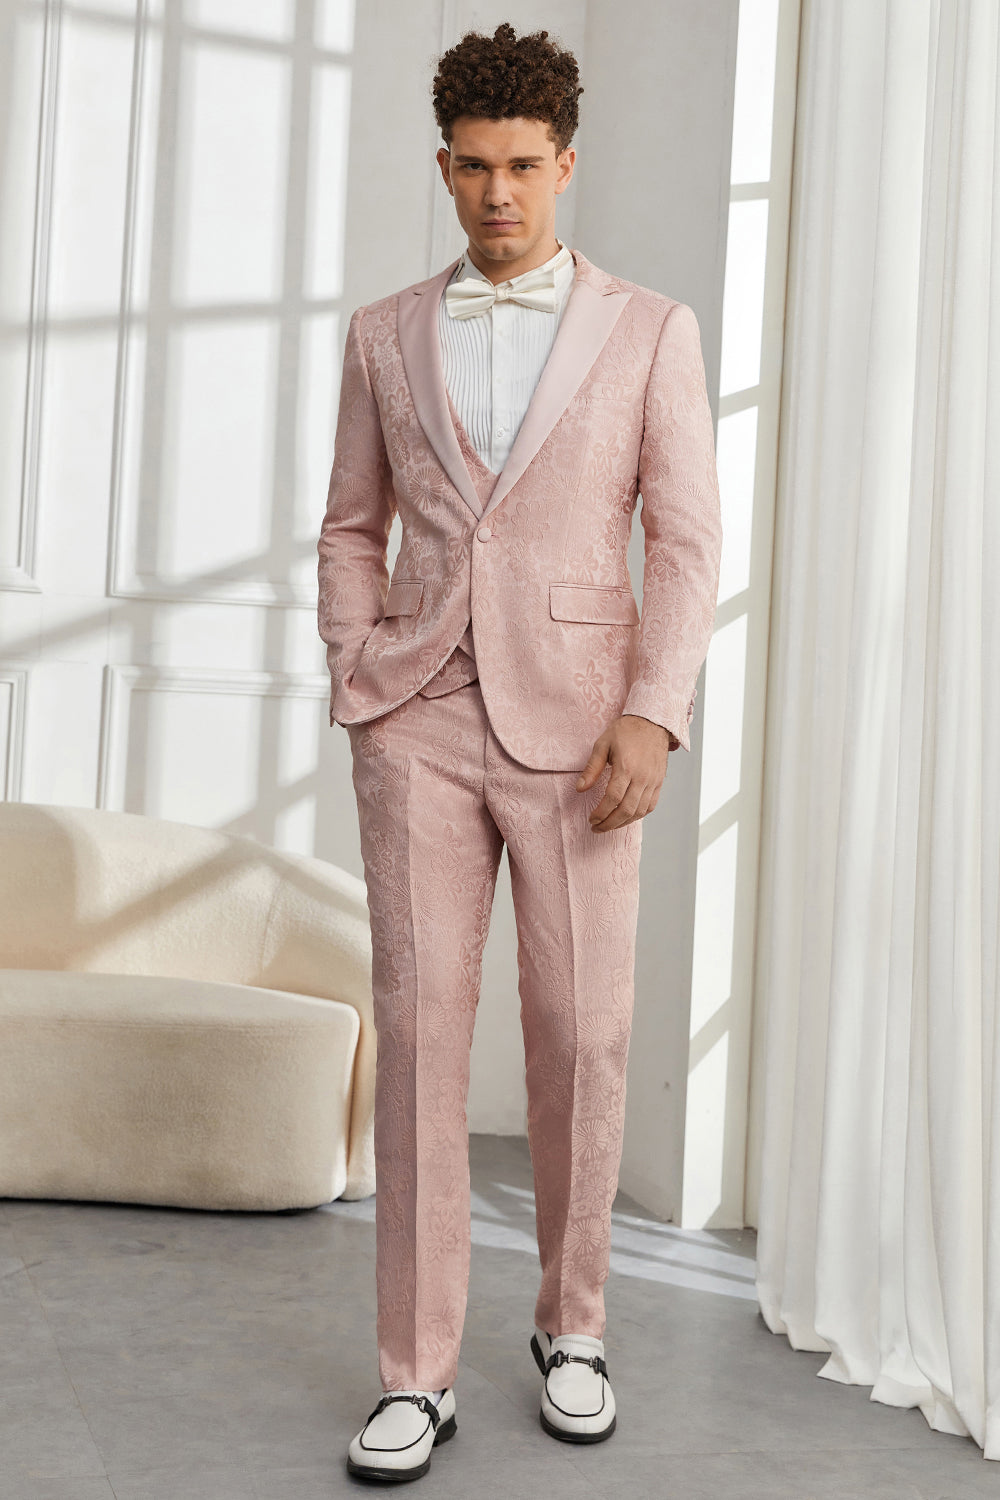 Leely Light Pink Men's Prom Wedding Party Suits Peak Lapel Jacquard One Button Homecoming Tuxedos